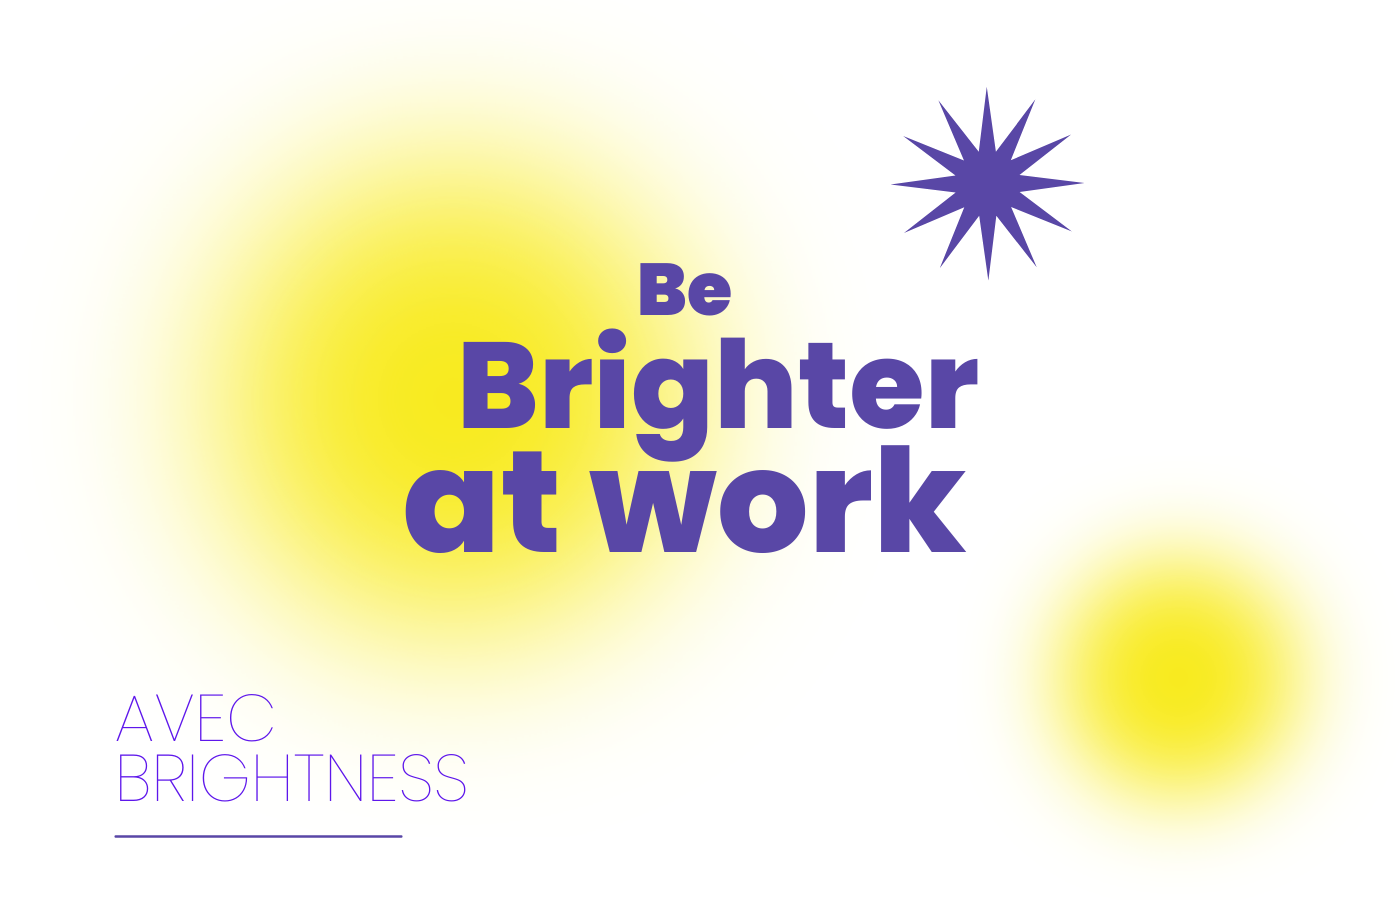 The pillars of our "Brighter at work!" support